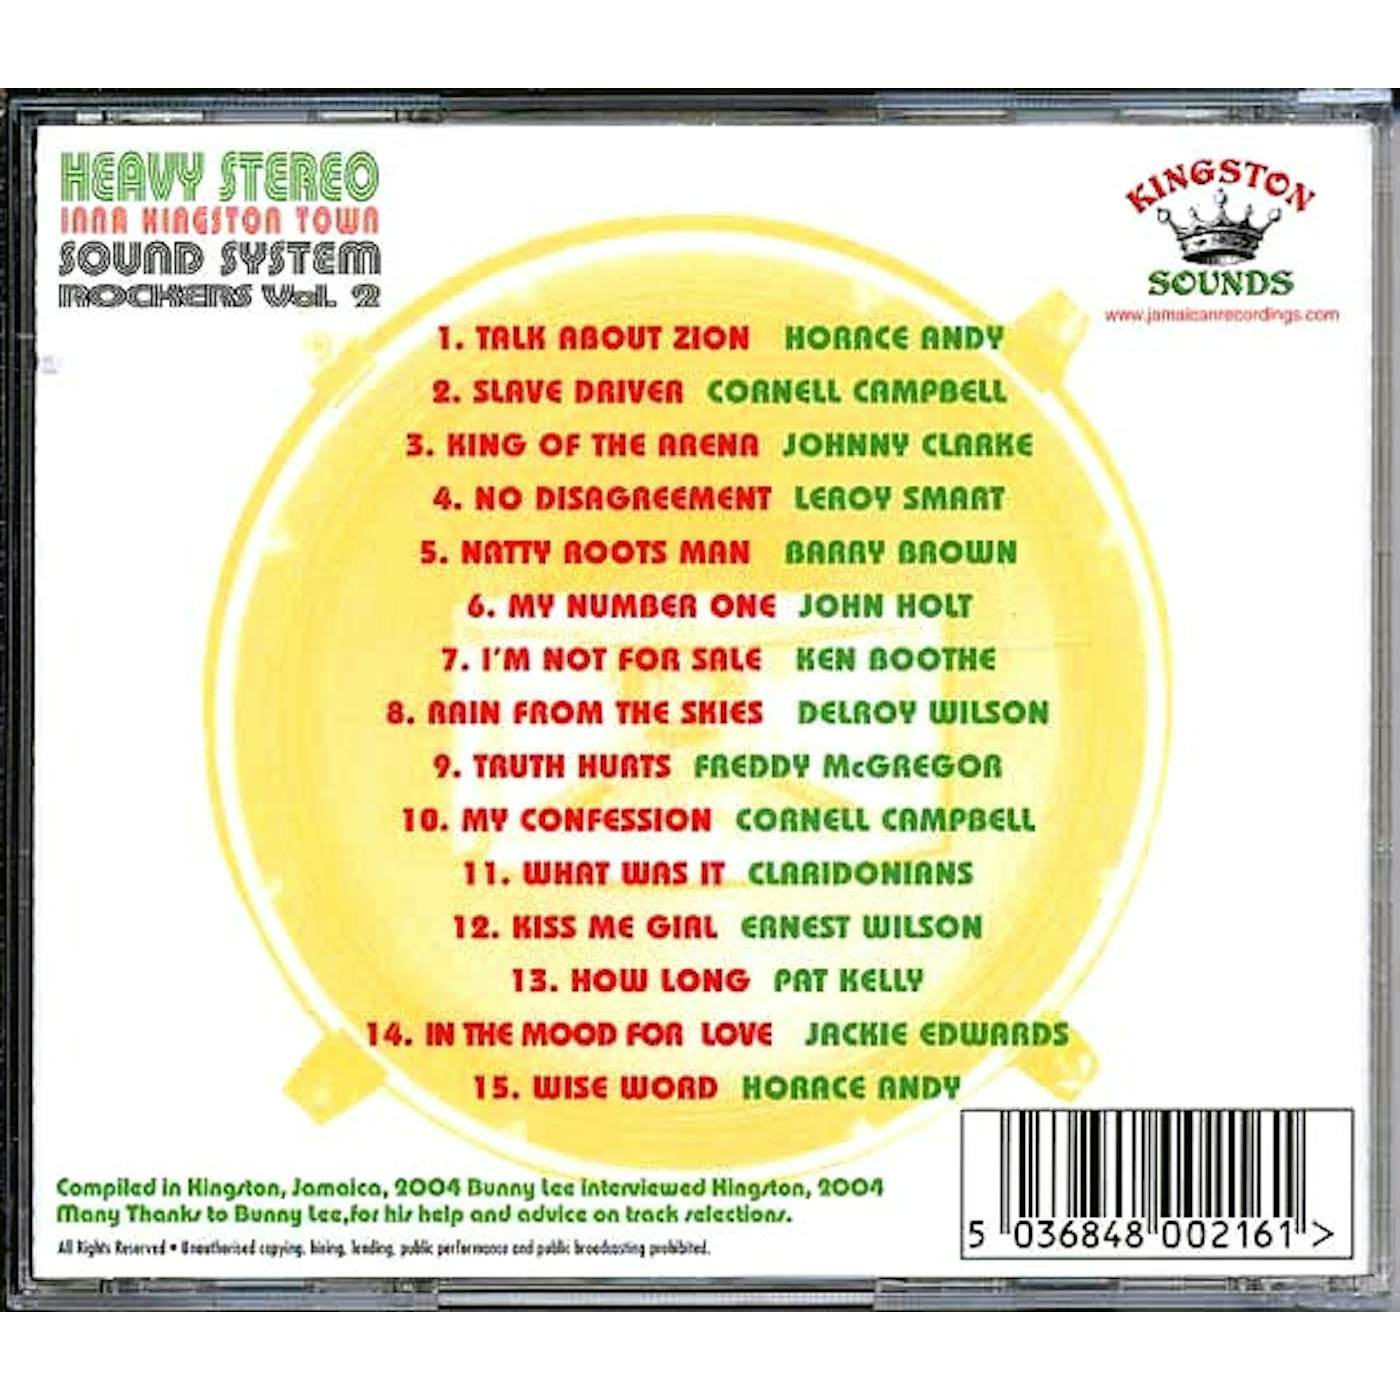 Leroy Smart, Barry Brown, Cornell Campbell, Etc.  CD -  Sound System Rockers Volume 2: Heavy Stereo Inna Kingston Town